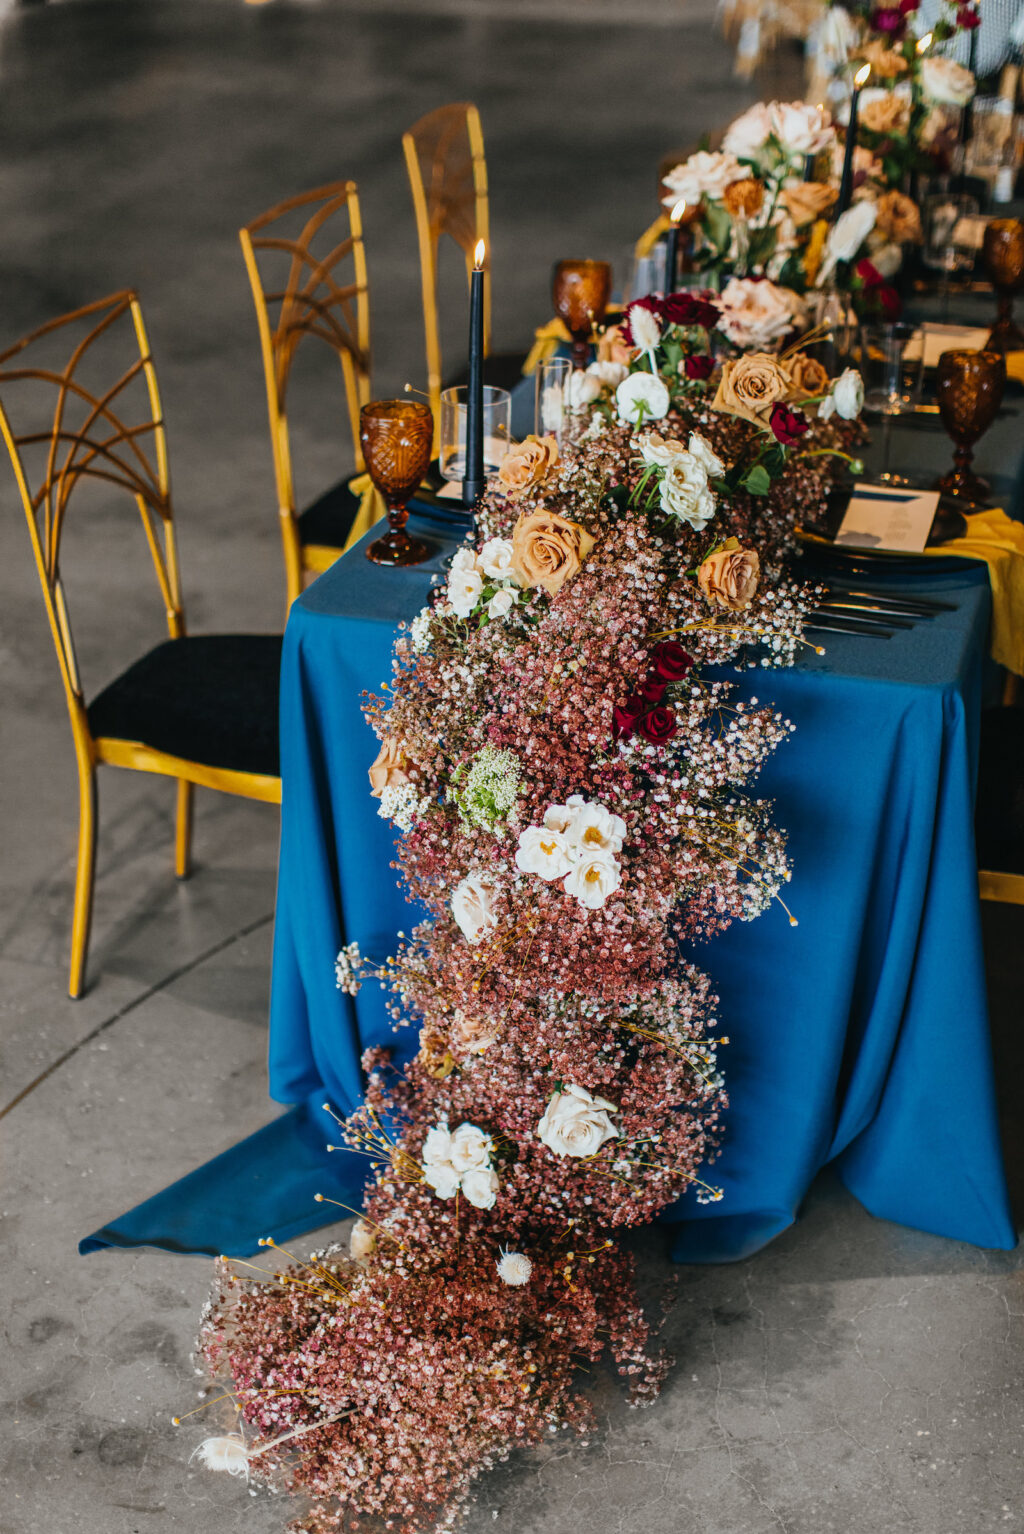 Modern and Edgy Fall Wedding Decor, Long Table with Royal Blue Table Linen, Lush Floral Table Runner with White and Yellow Roses, Pink and White Babys Breathe, Chic Gold Chairs | Tampa Bay Wedding Venue Hyde House | Wedding Rentals Kate Ryan Event Rentals